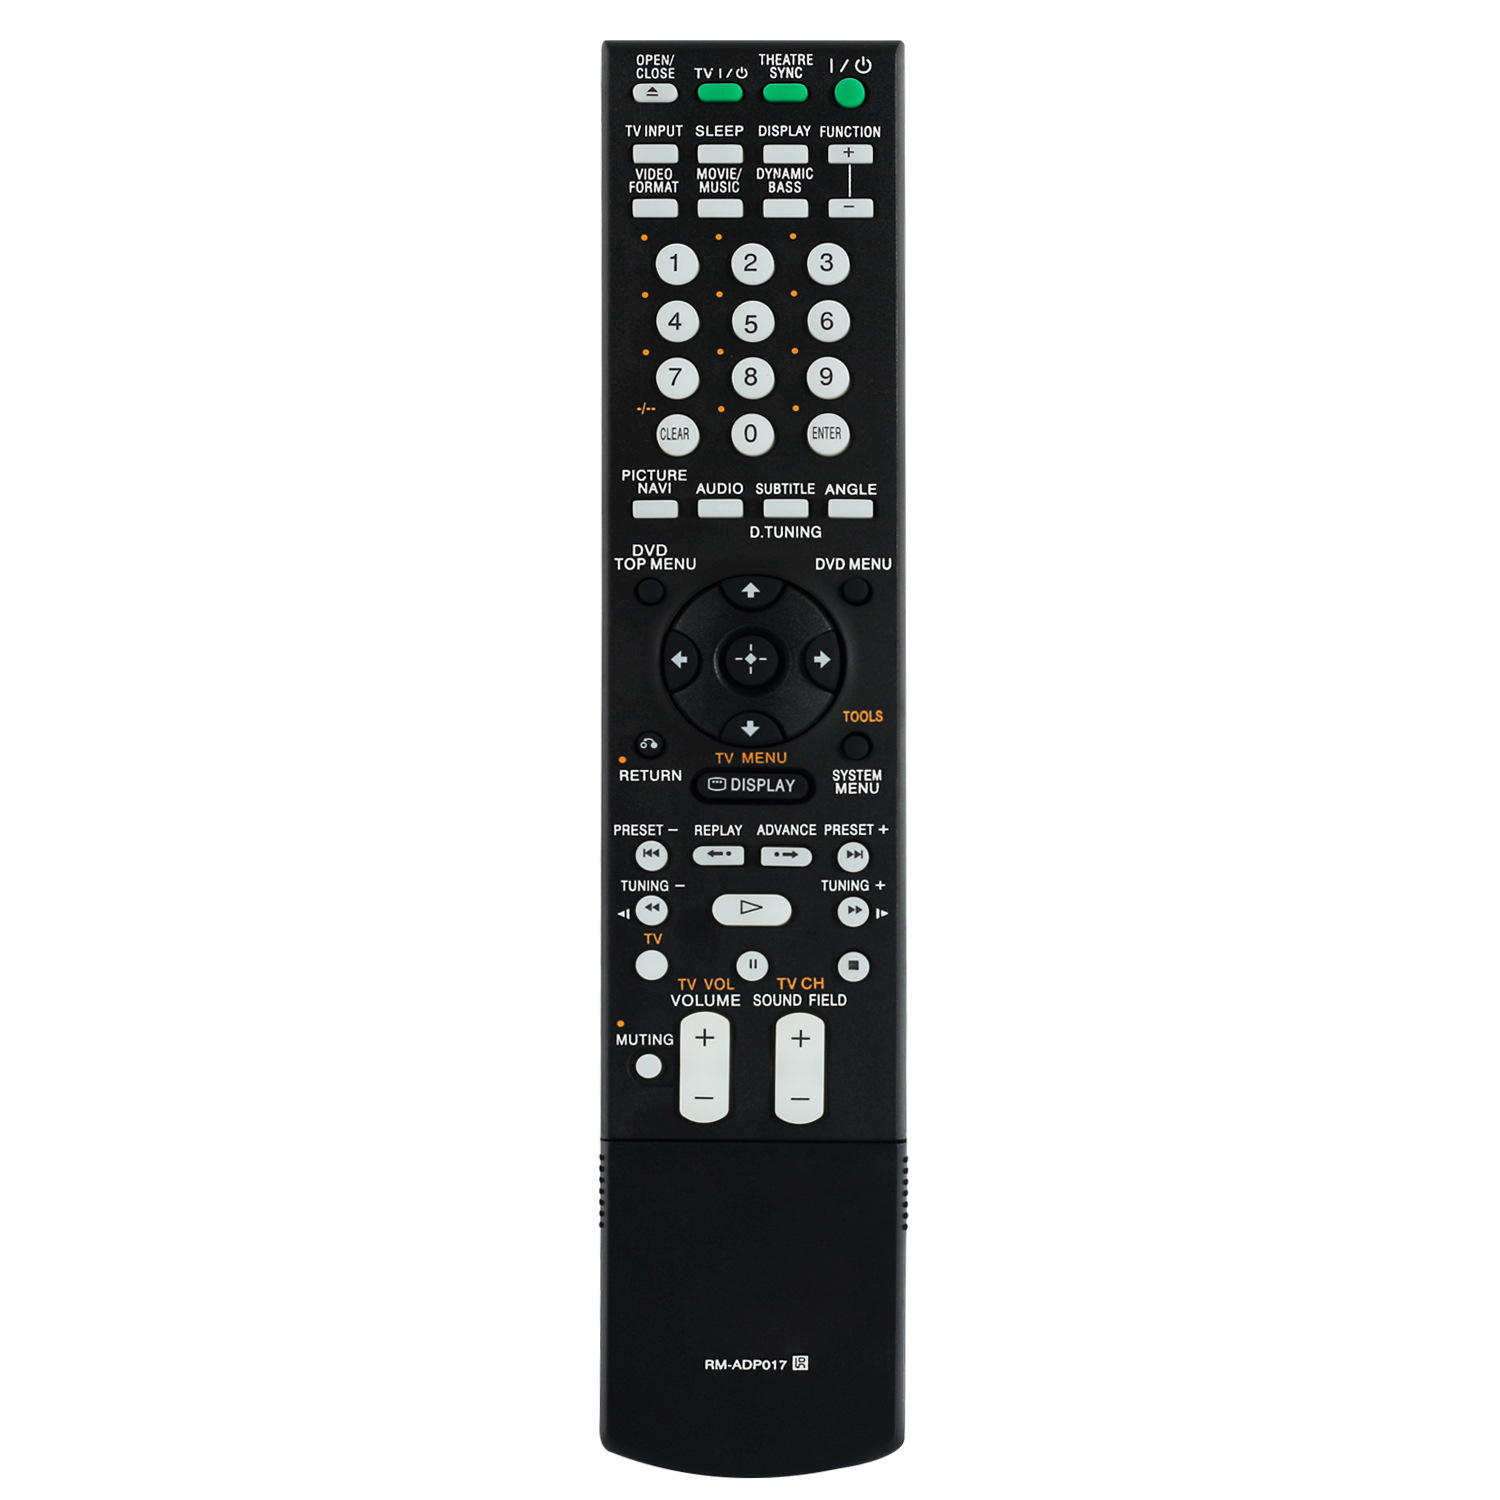 

TV Remote Control RM-ADP017 for SONY Home Theater DVD Player DAV-DZ830W HCD-DZ850KW